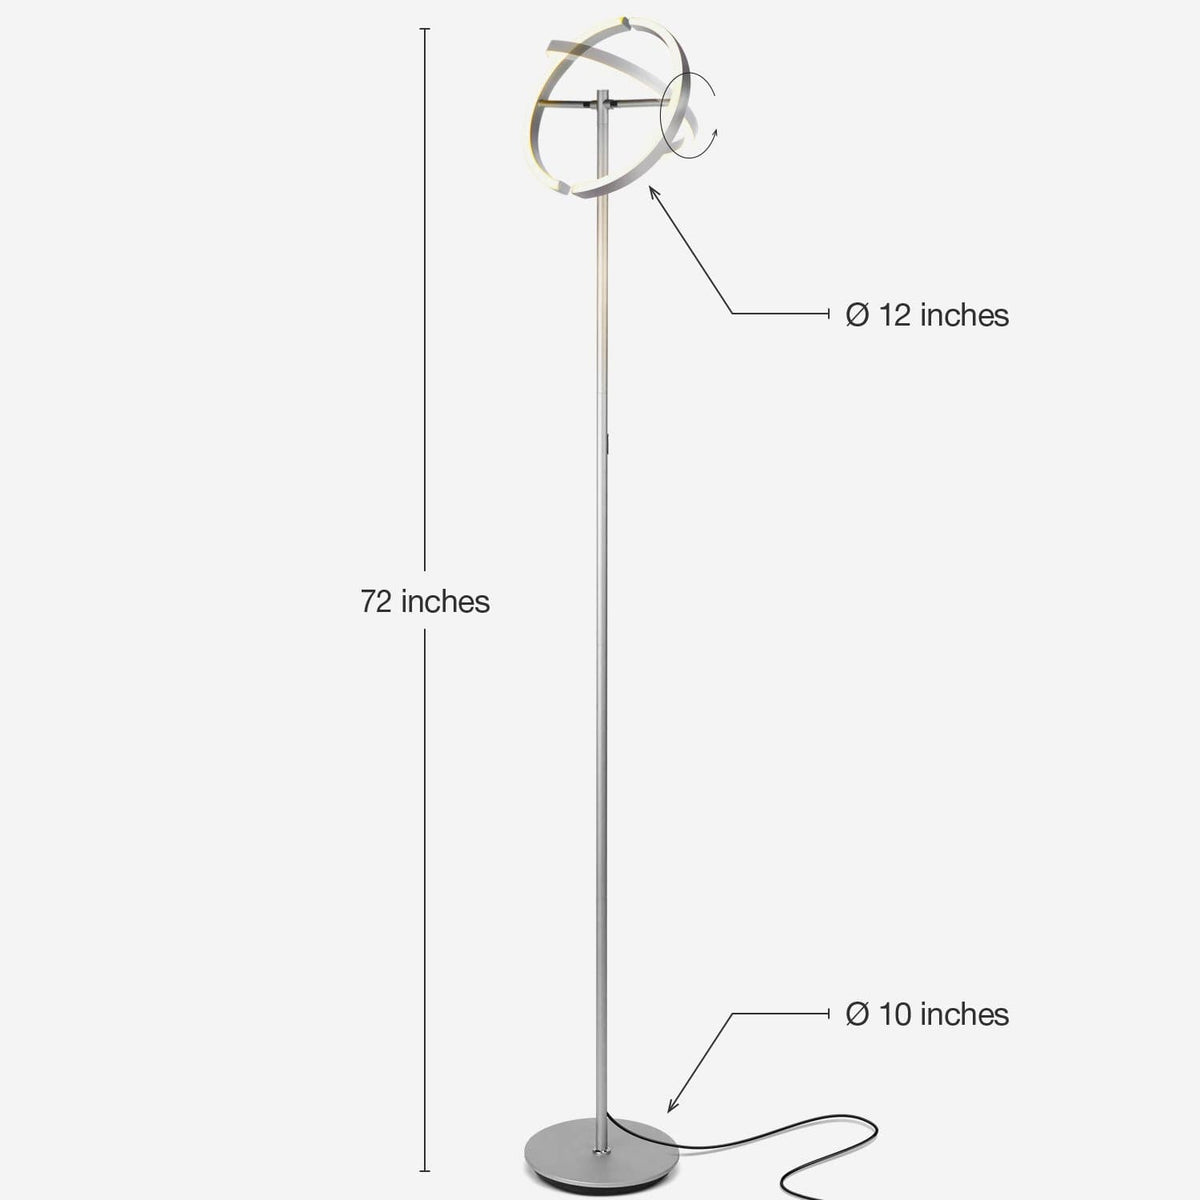 The Halo Split - Modern LED Torchiere Floor Lamp by Brightech